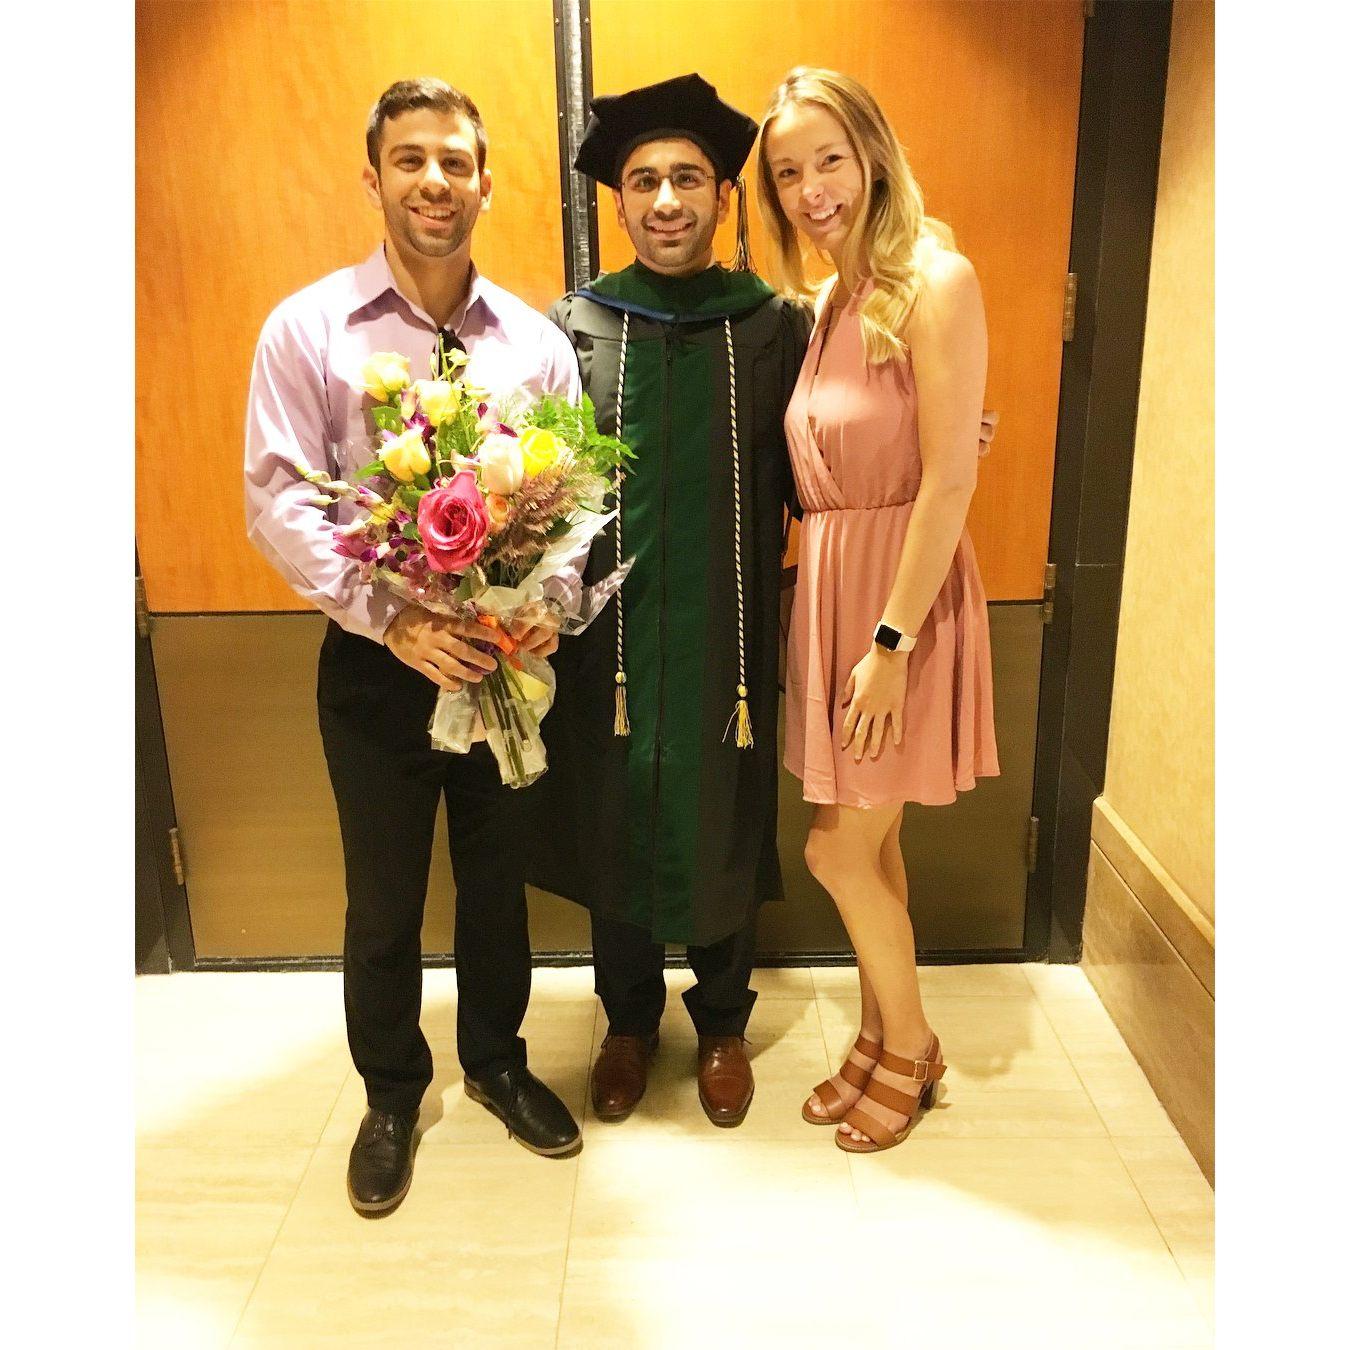 Back in Vegas for Sami's graduation from medical school. May 2018